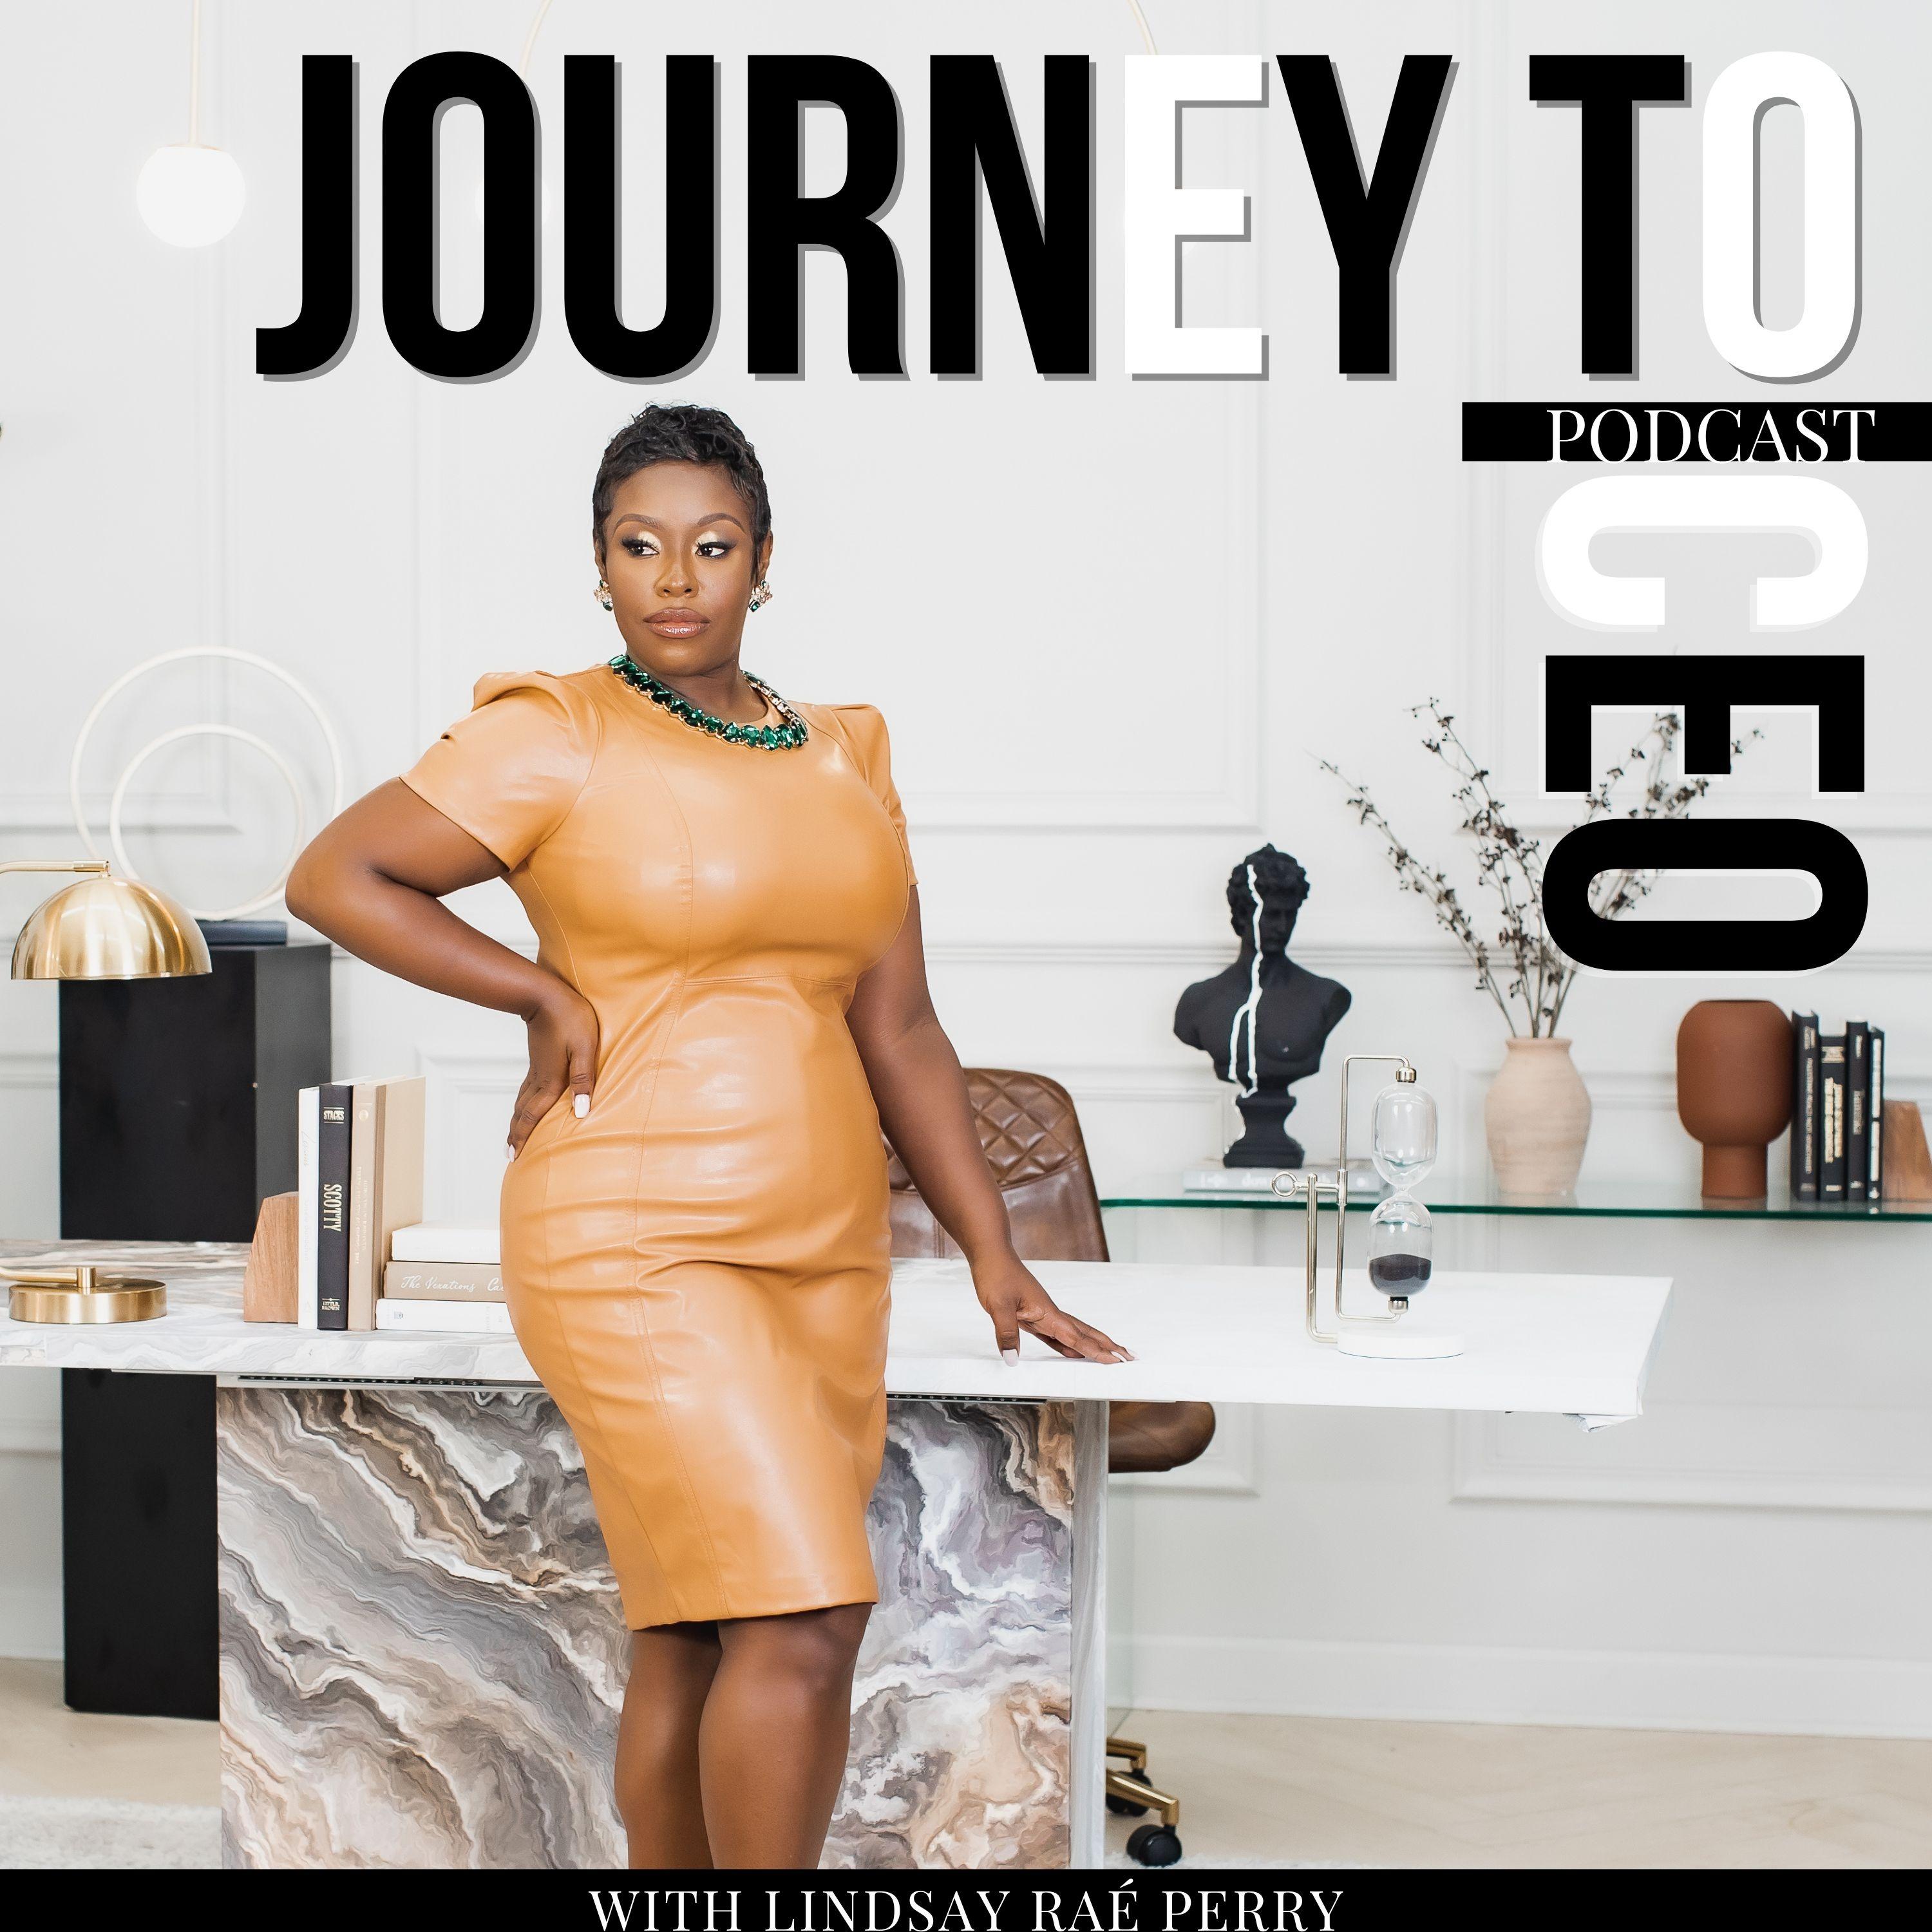 Journey to CEO with Lindsay Raé Perry